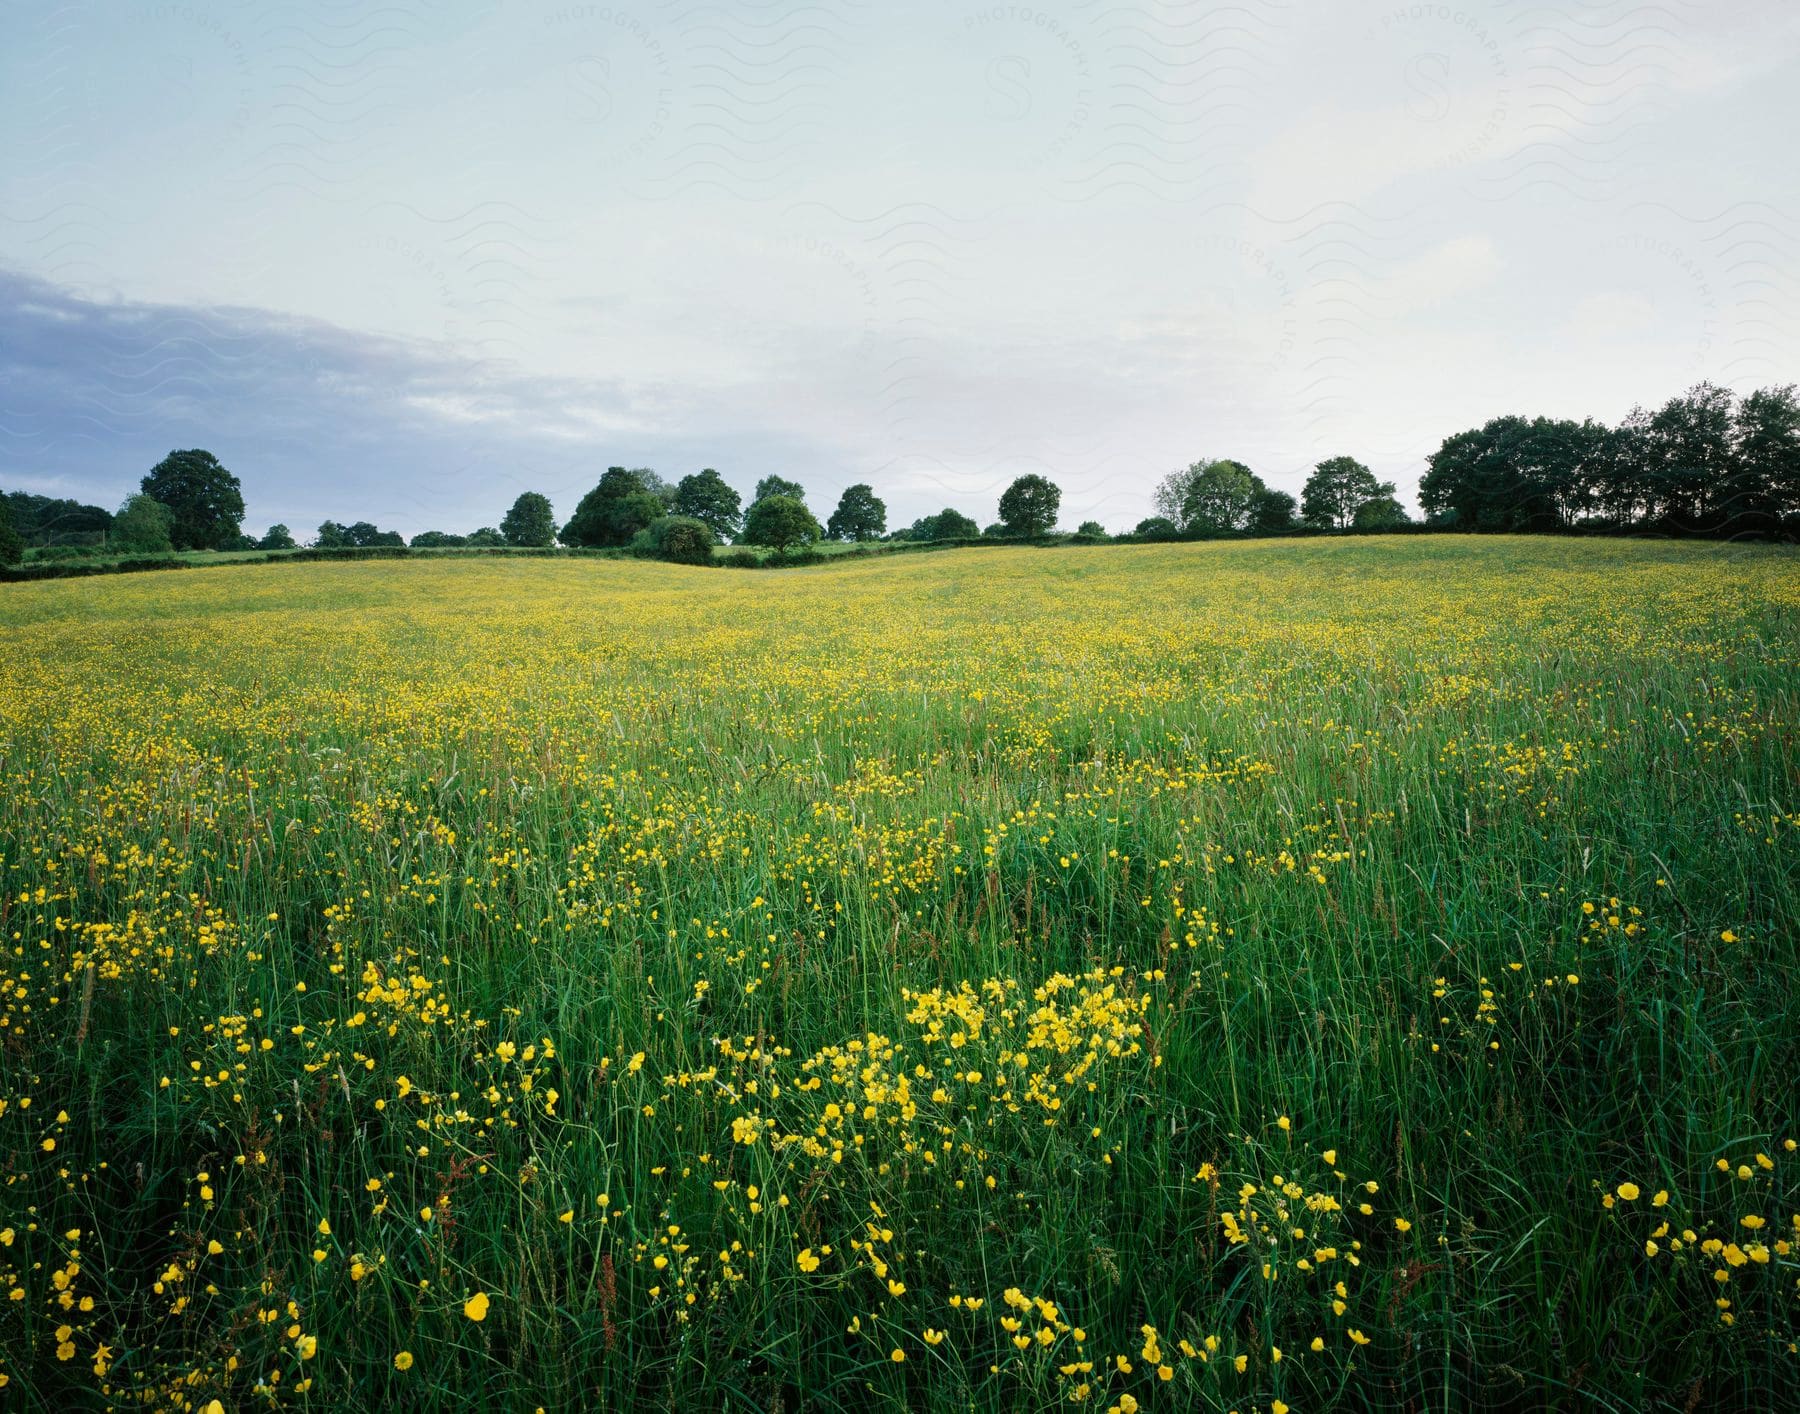 A field of flowers in green and yellow